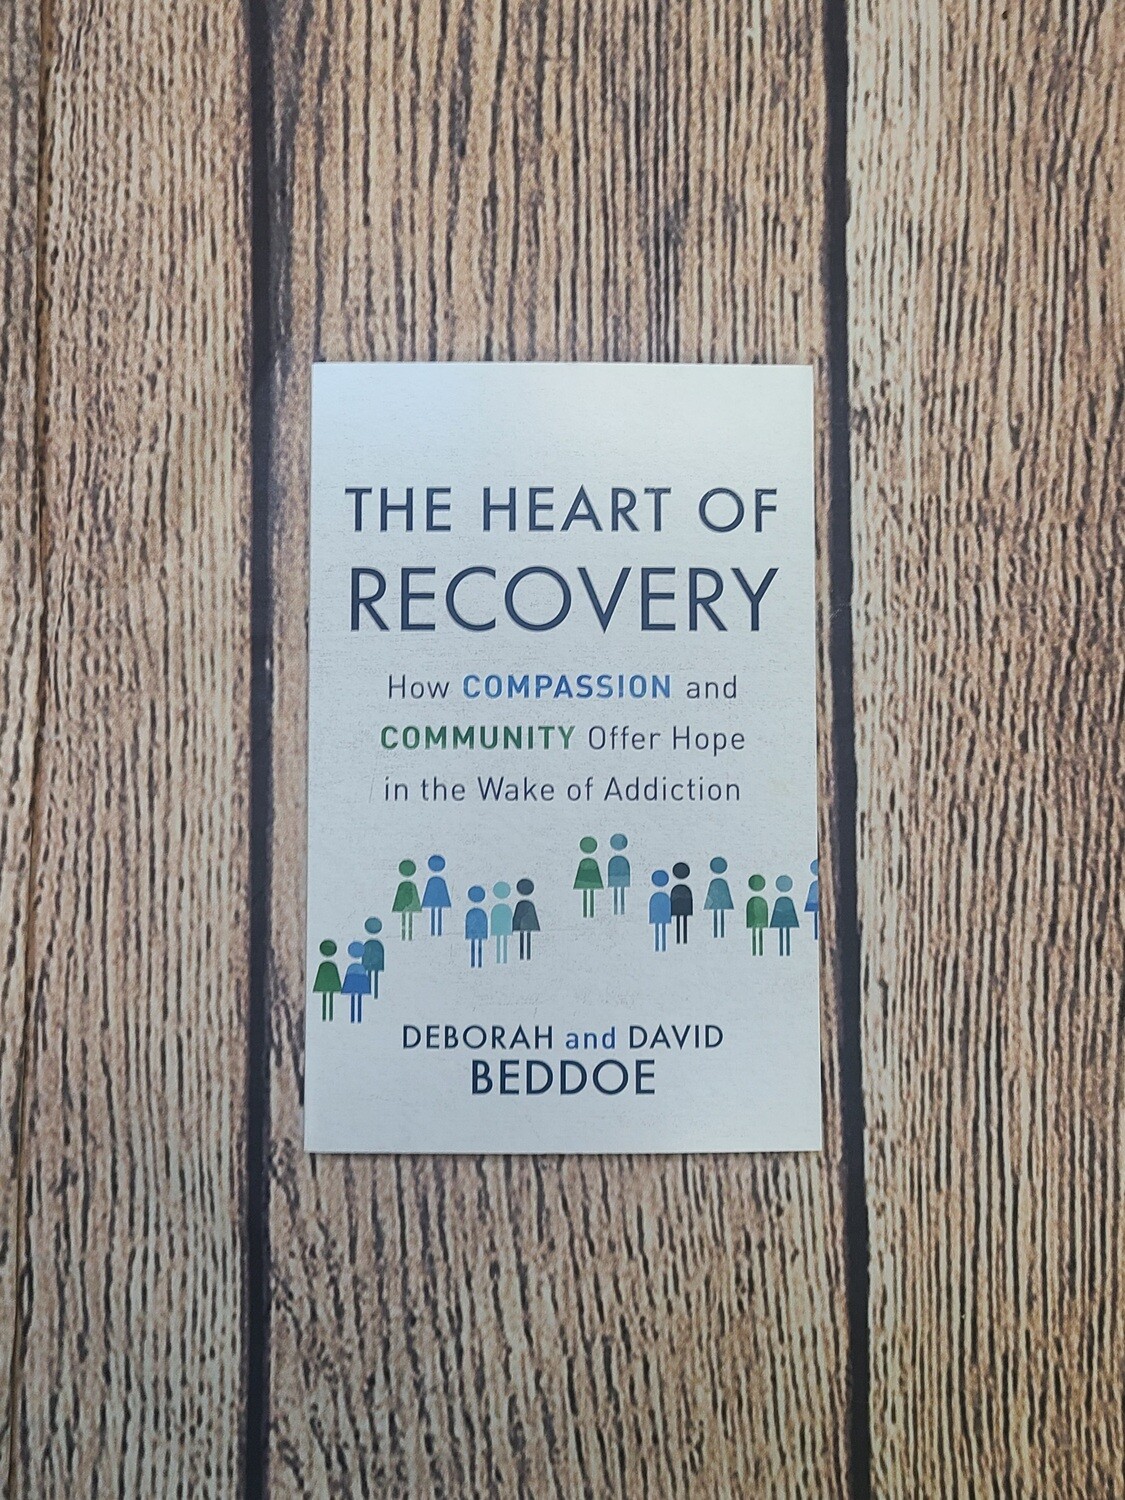 The Heart of Recovery: How Compassion and Community Offer Hope in the Wake of Addiction by Deborah and David Beddoe